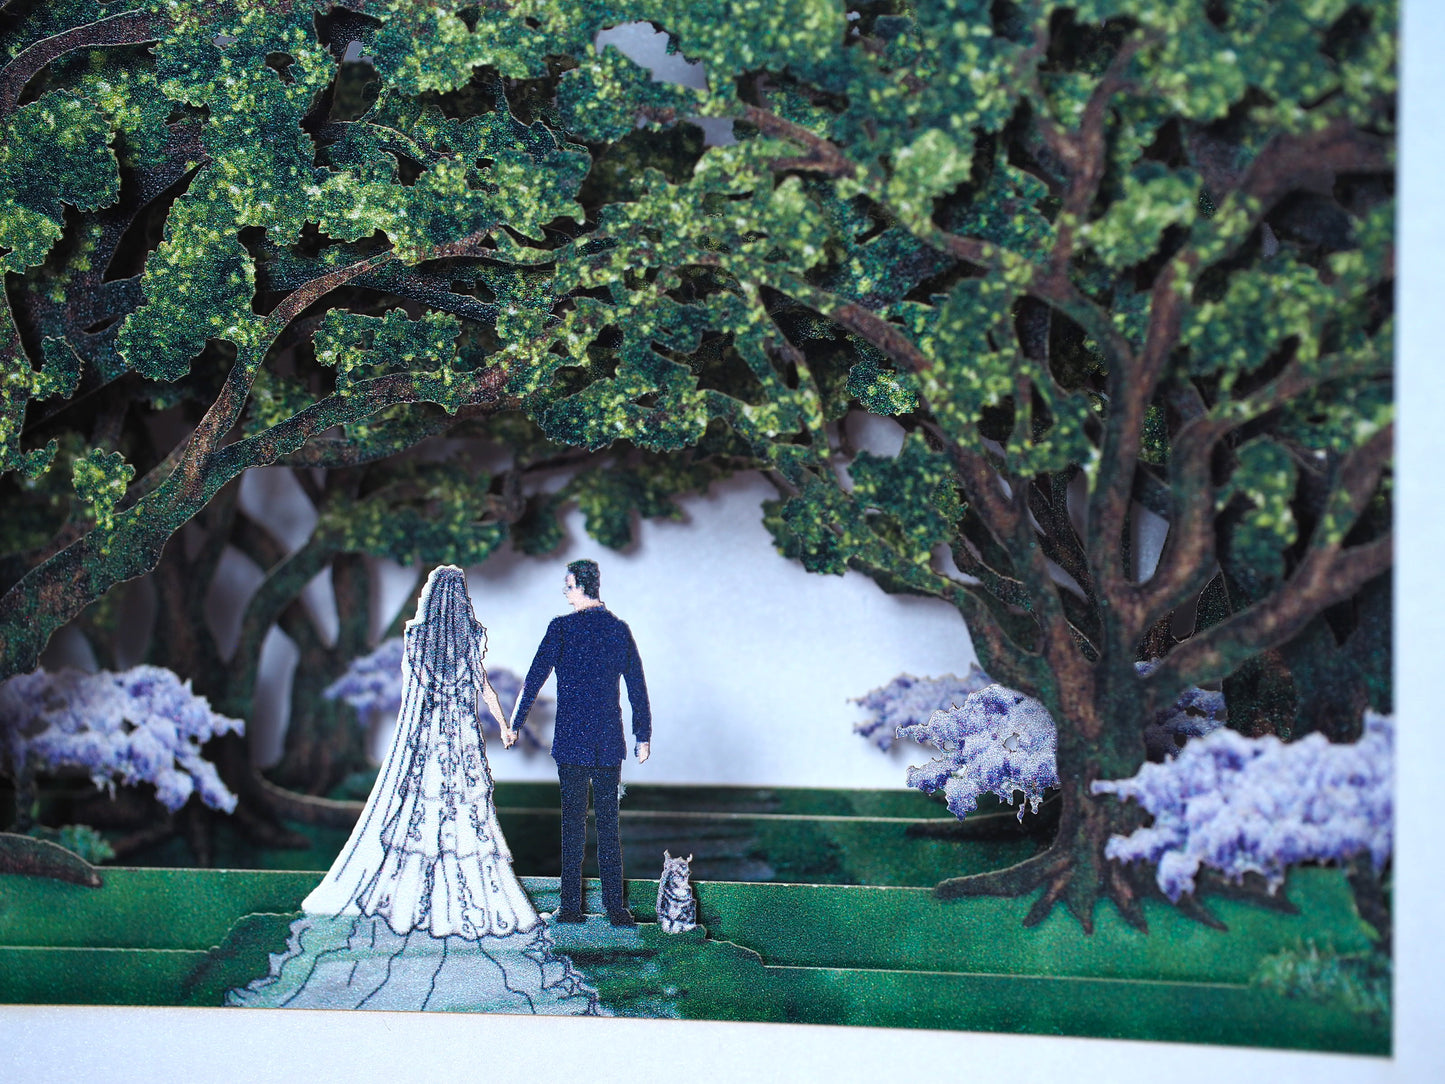 Oak park alley wedding invitation. Paper pop-up box cards. Wedding stationary. Bride and groom figures, cat, trees.